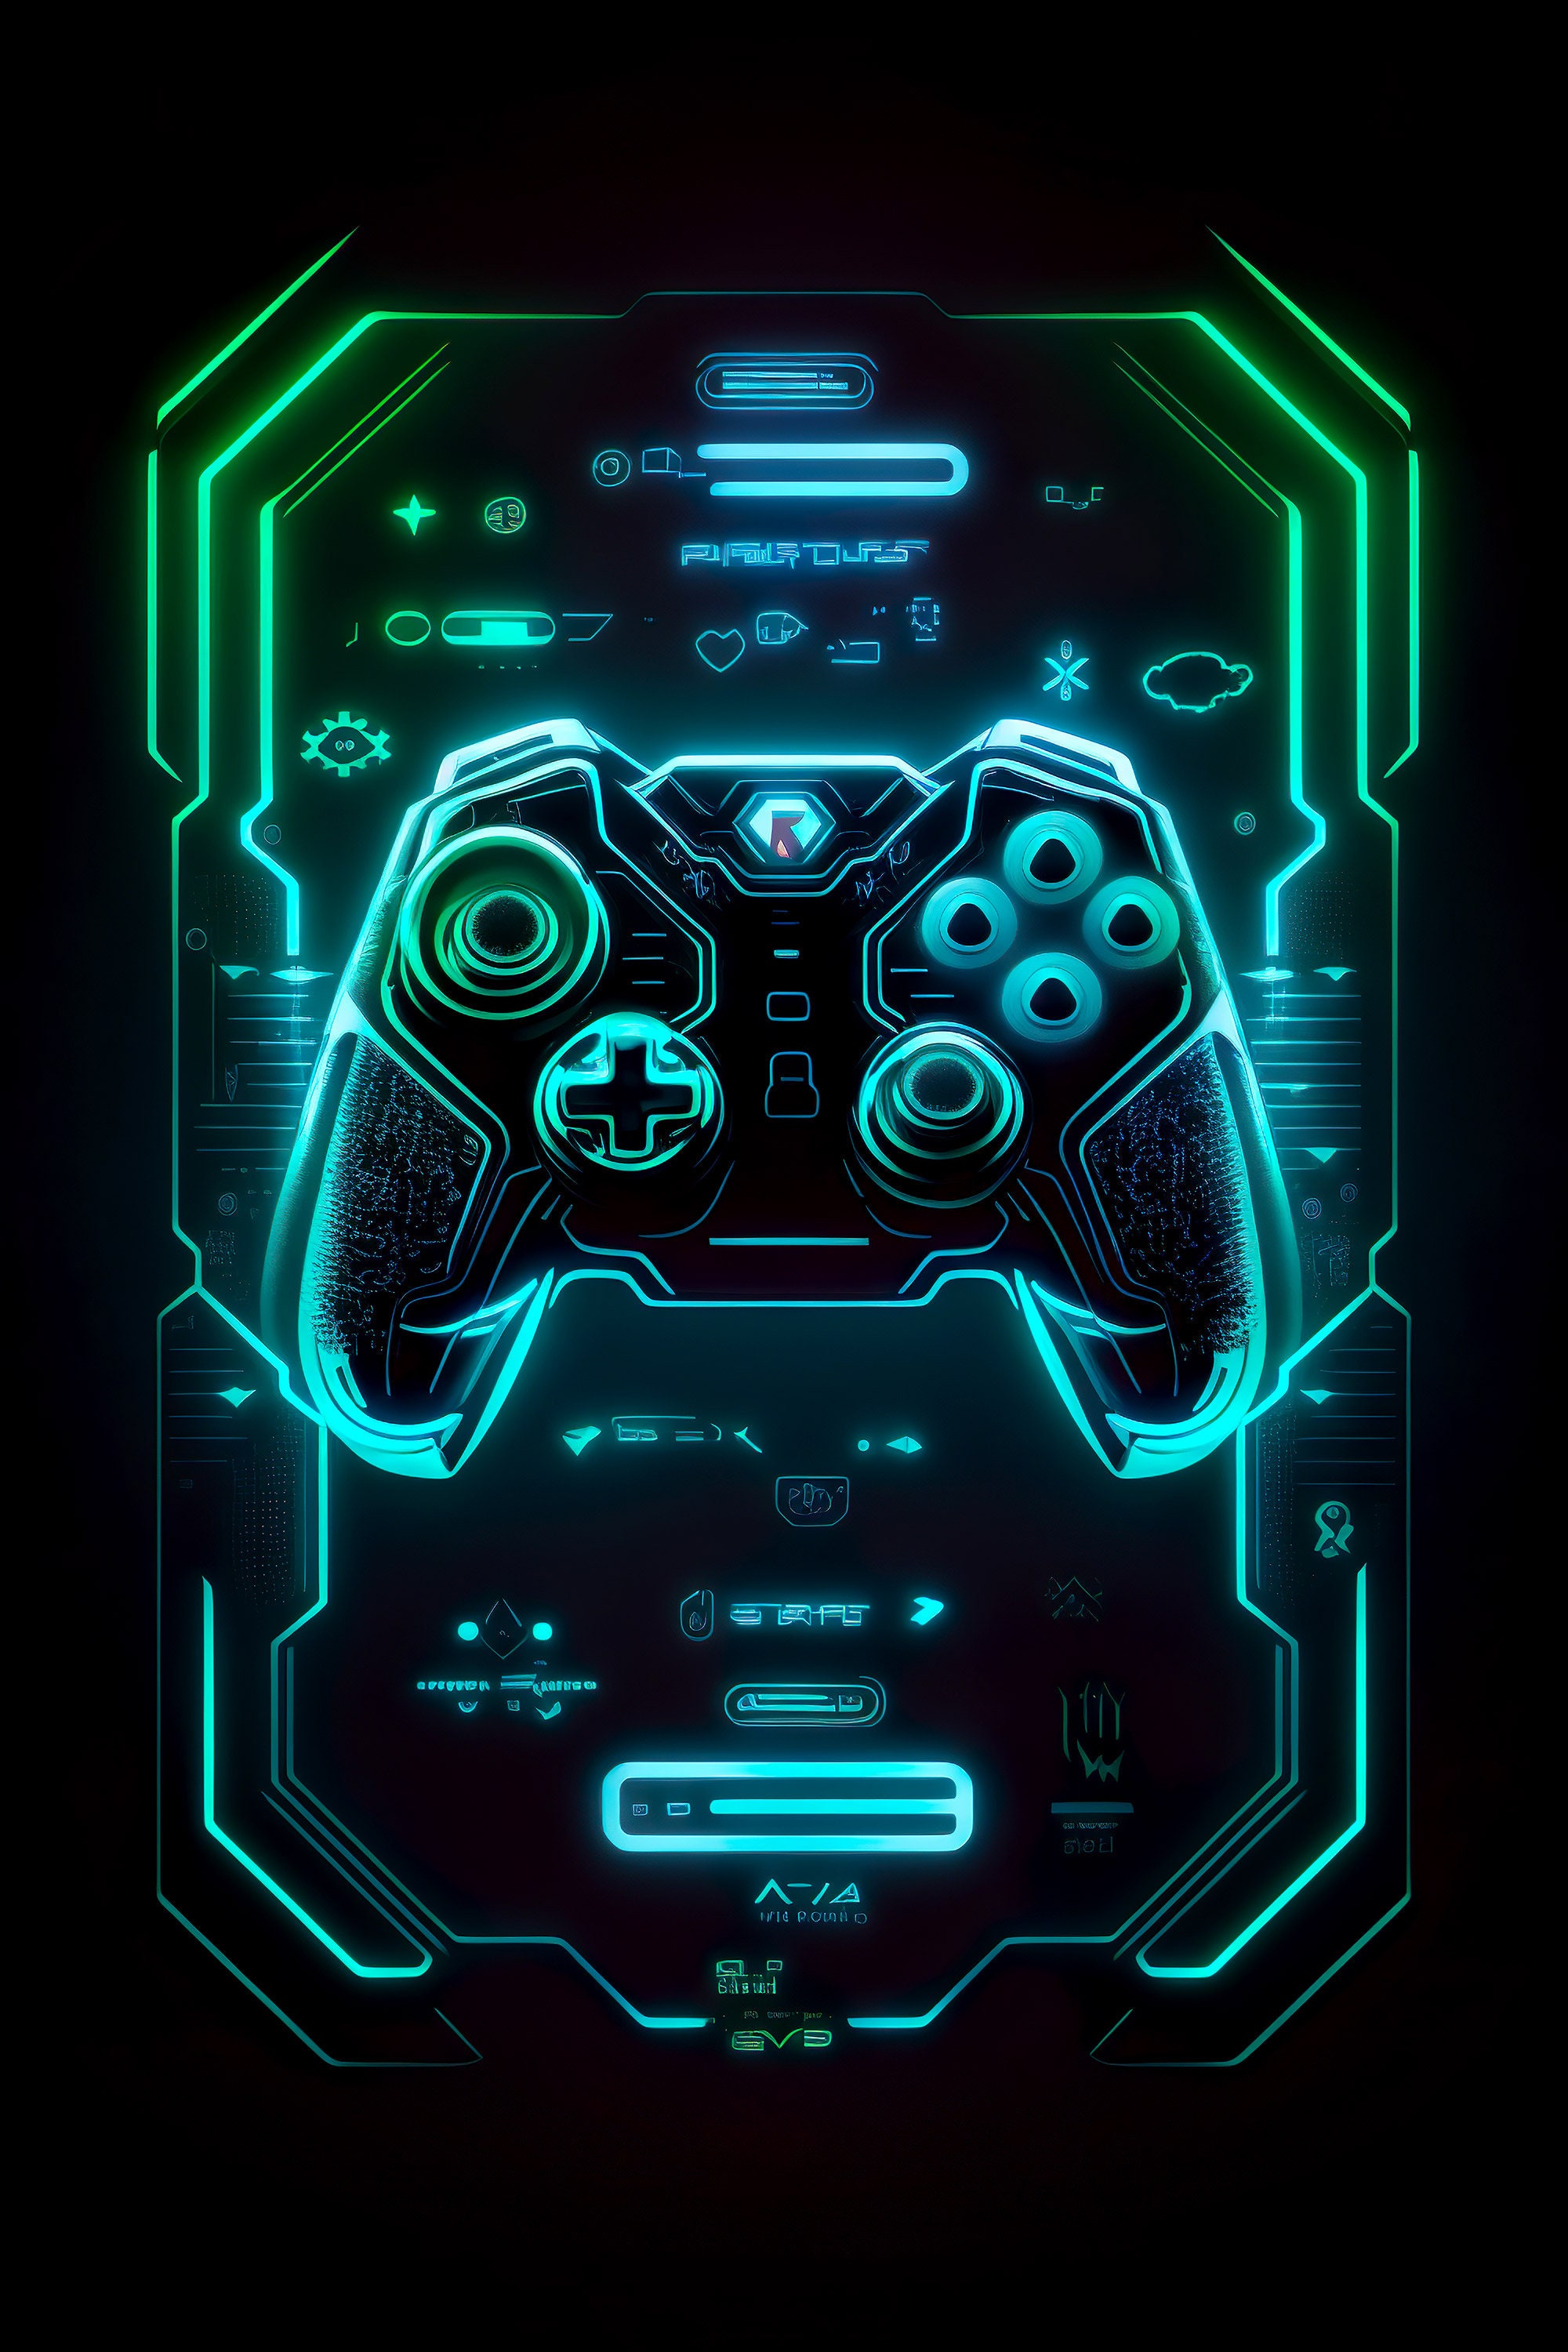 Poster Gamer PC & Playstation in neon colors and cool sayings for –  justgoodmood